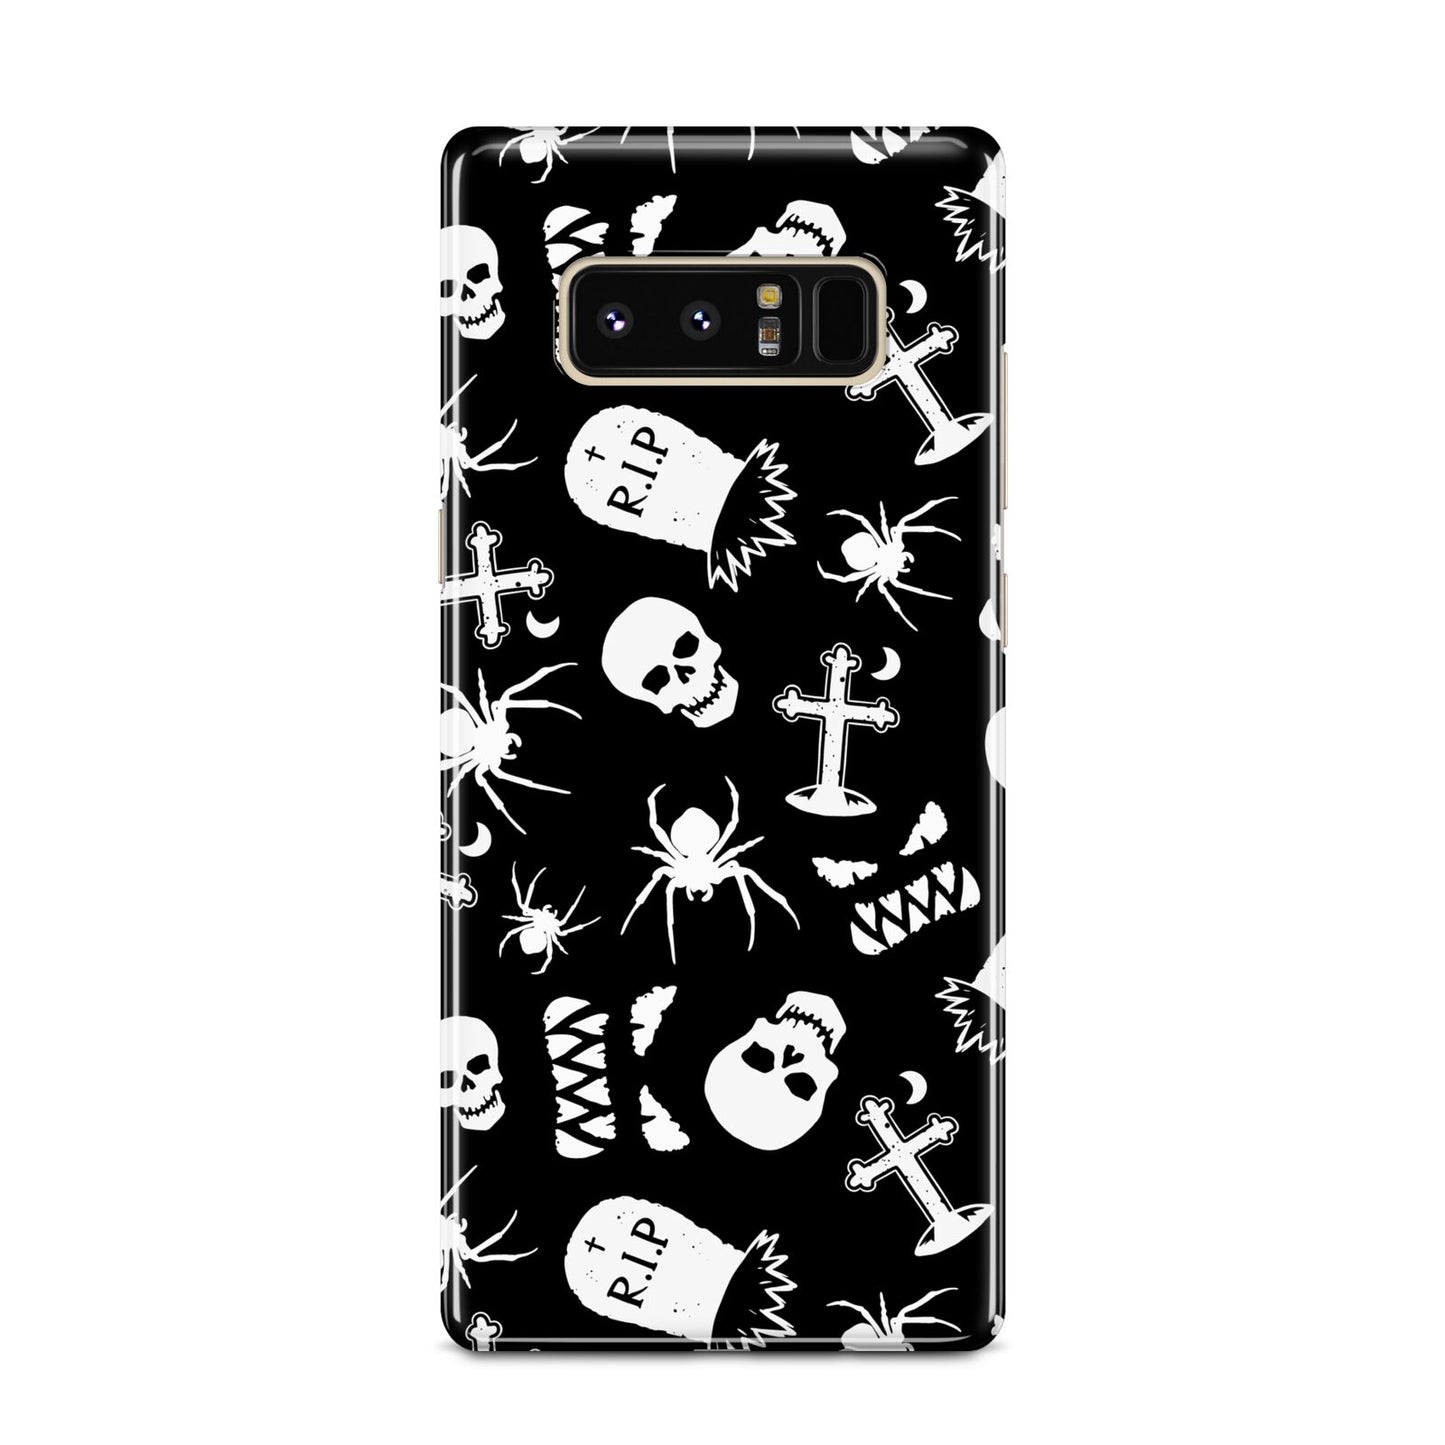 Spooky Illustrations Samsung Galaxy Note 8 Case